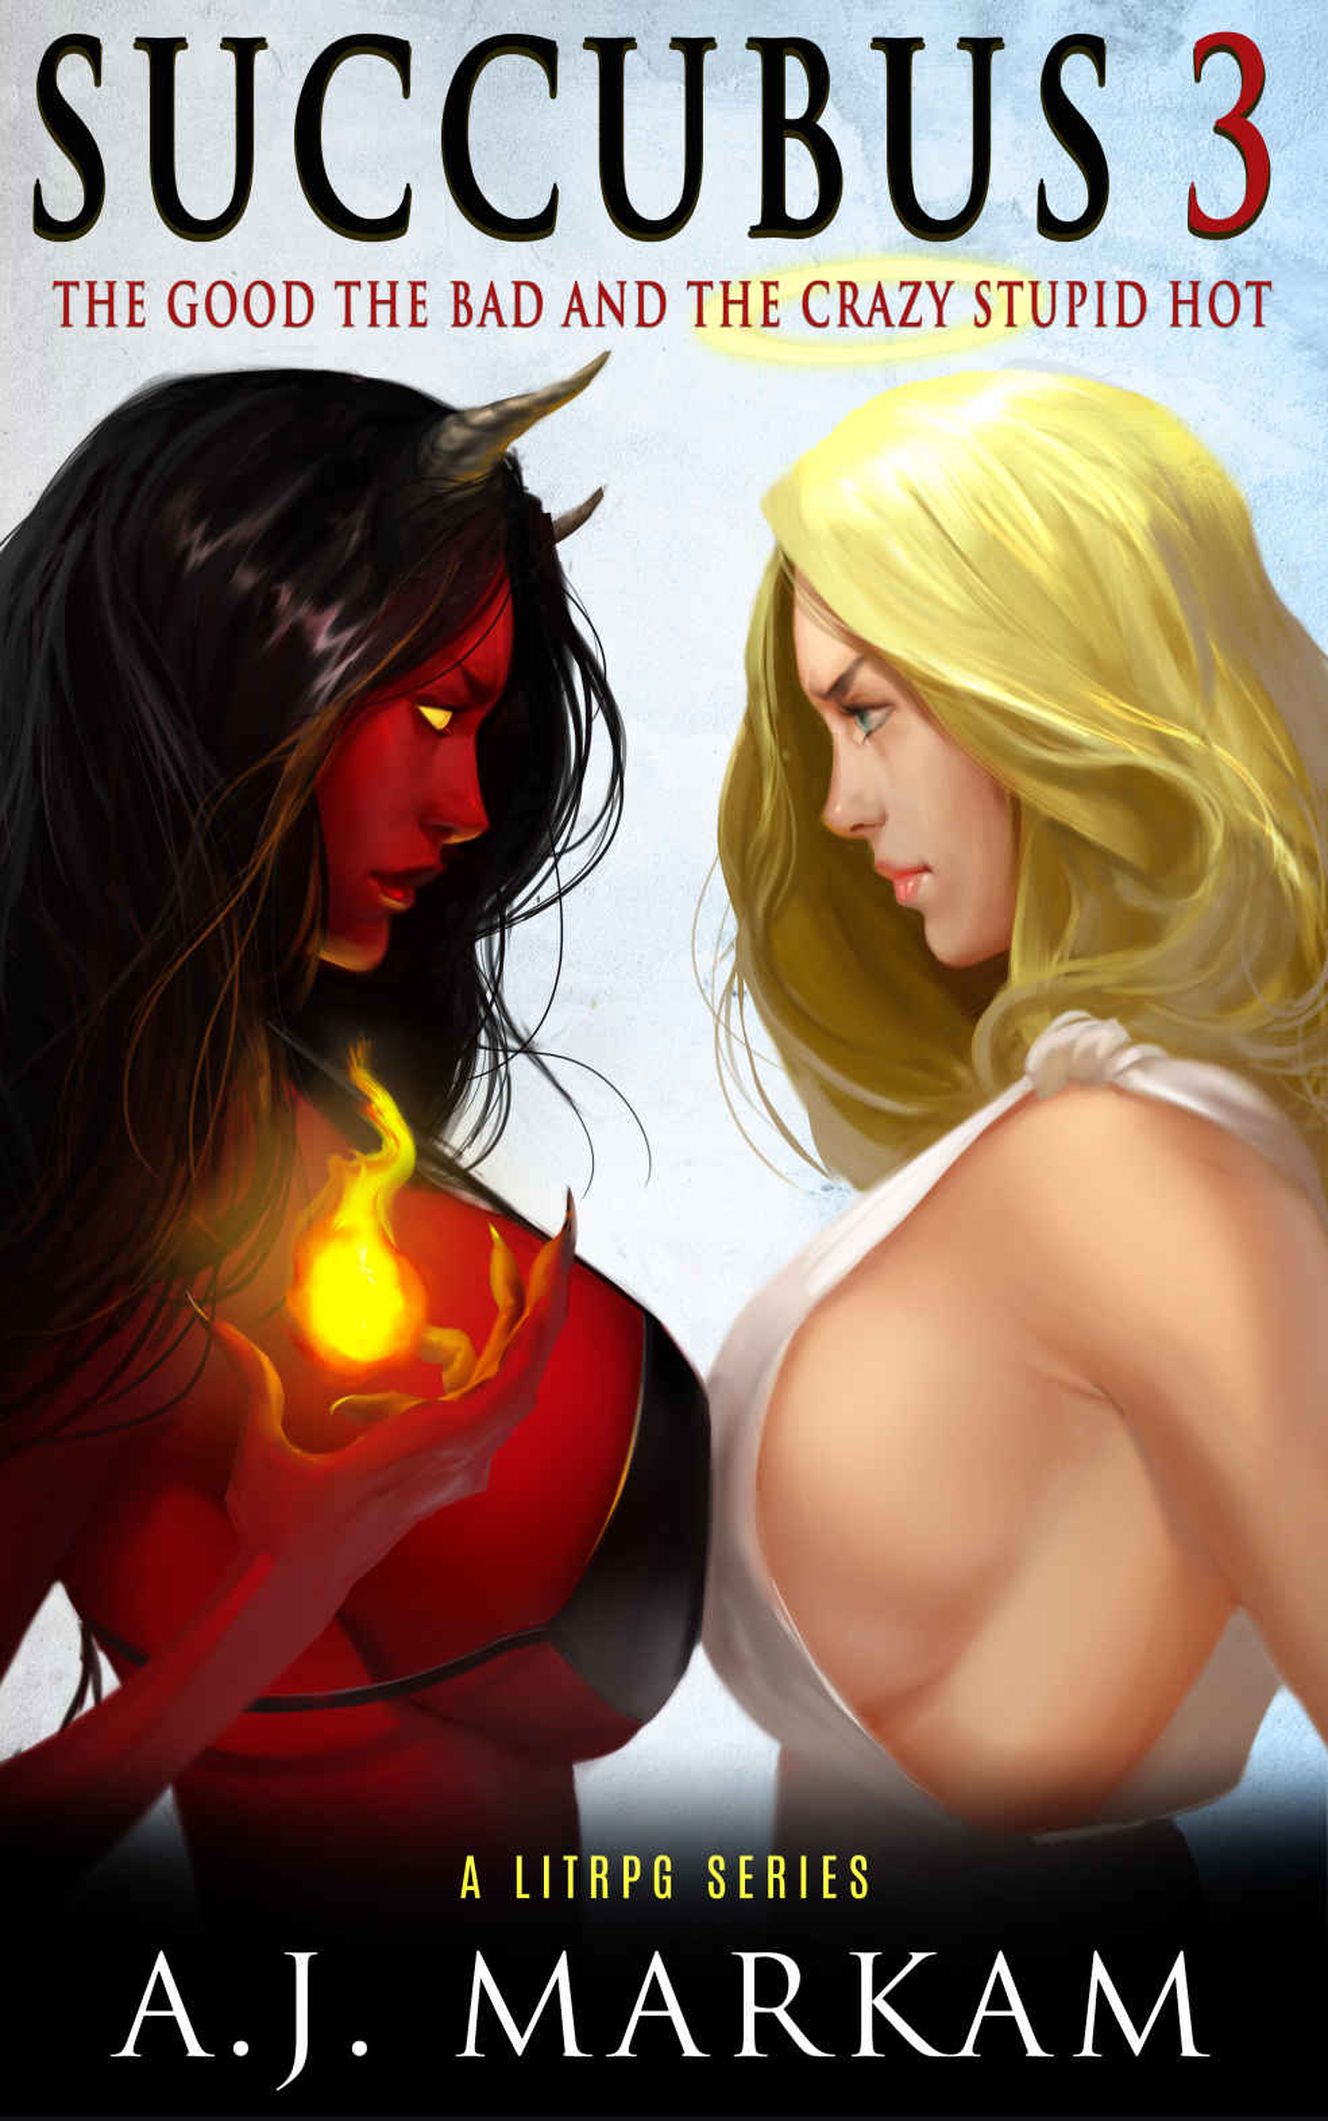 Succubus 3 (The Good The Bad And The Crazy Stupid Hot): A LitRPG Series